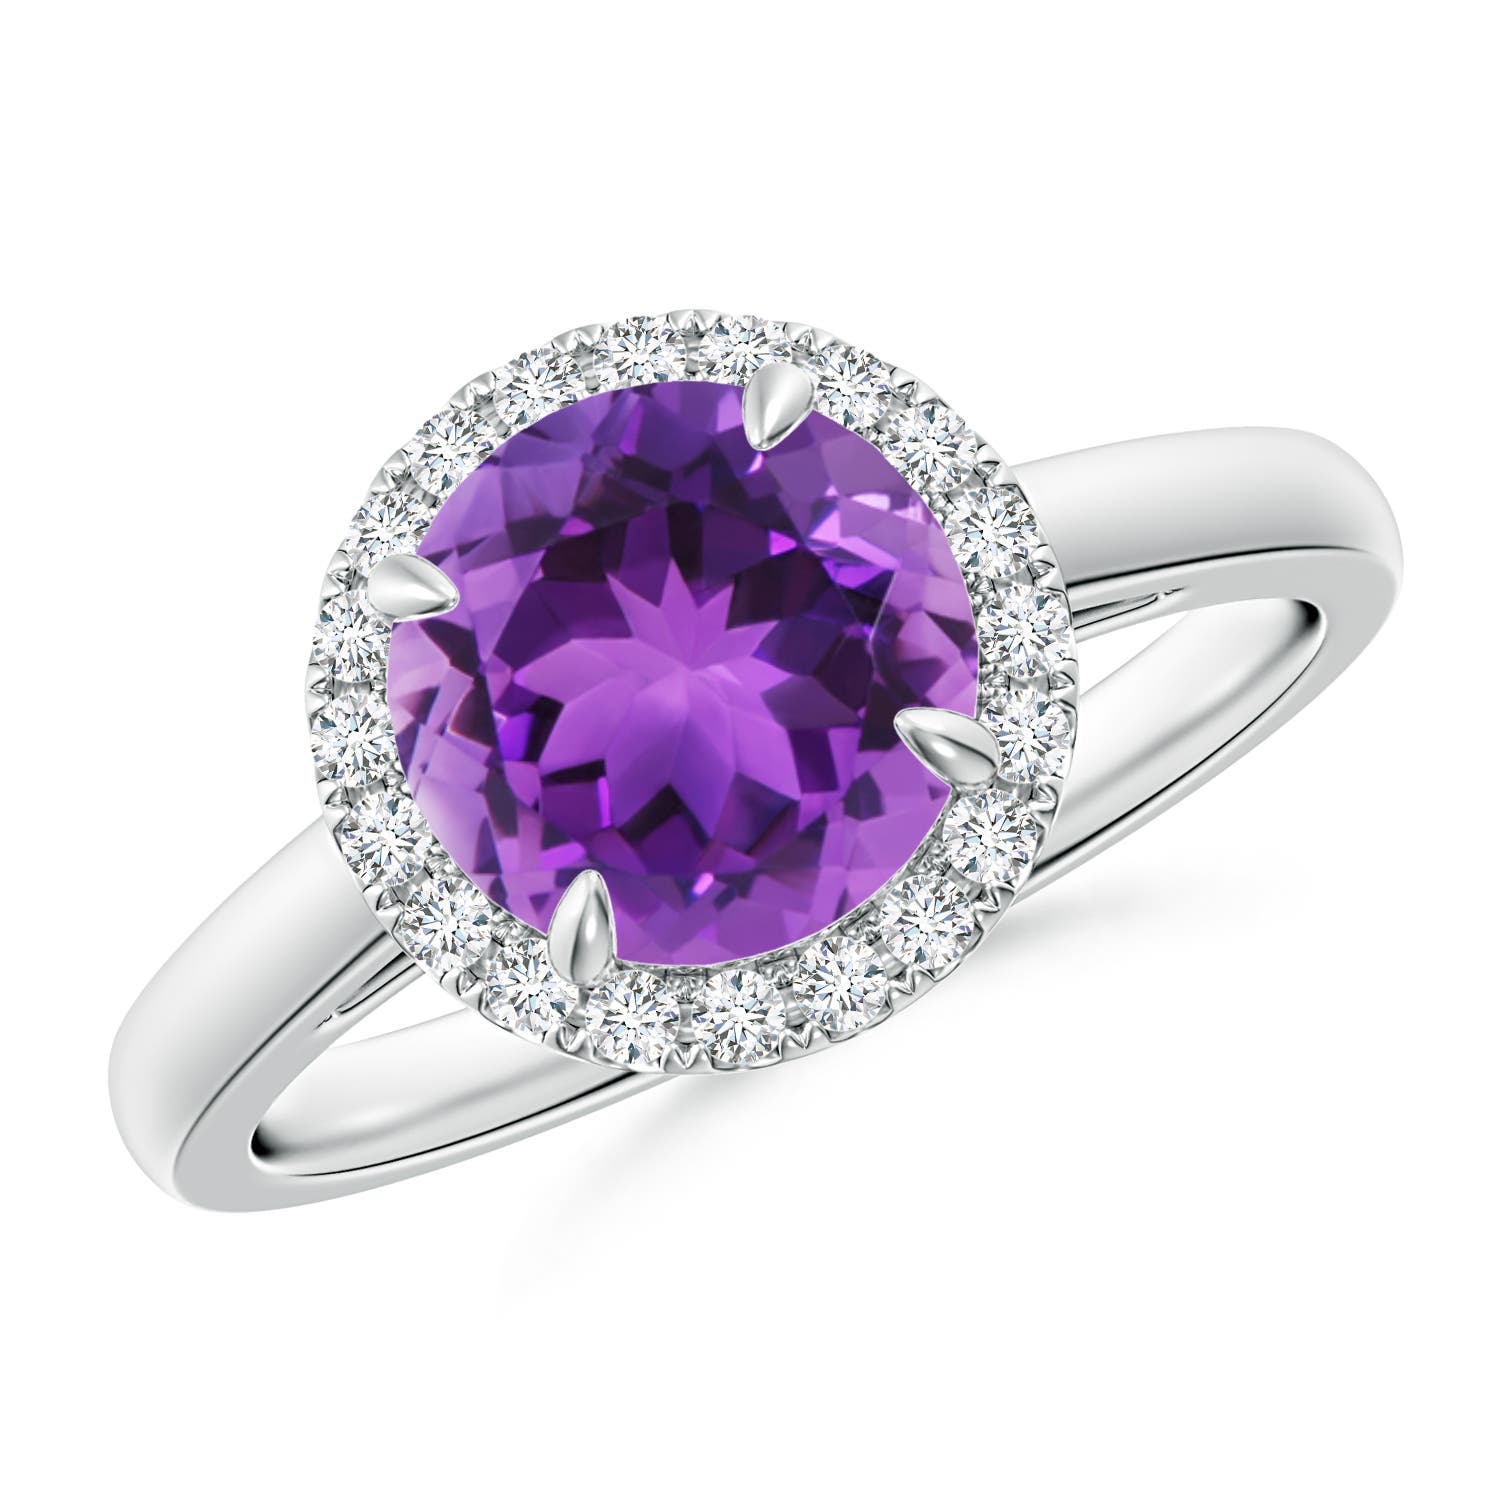 Round Amethyst Cathedral Ring with Diamond Halo | Angara